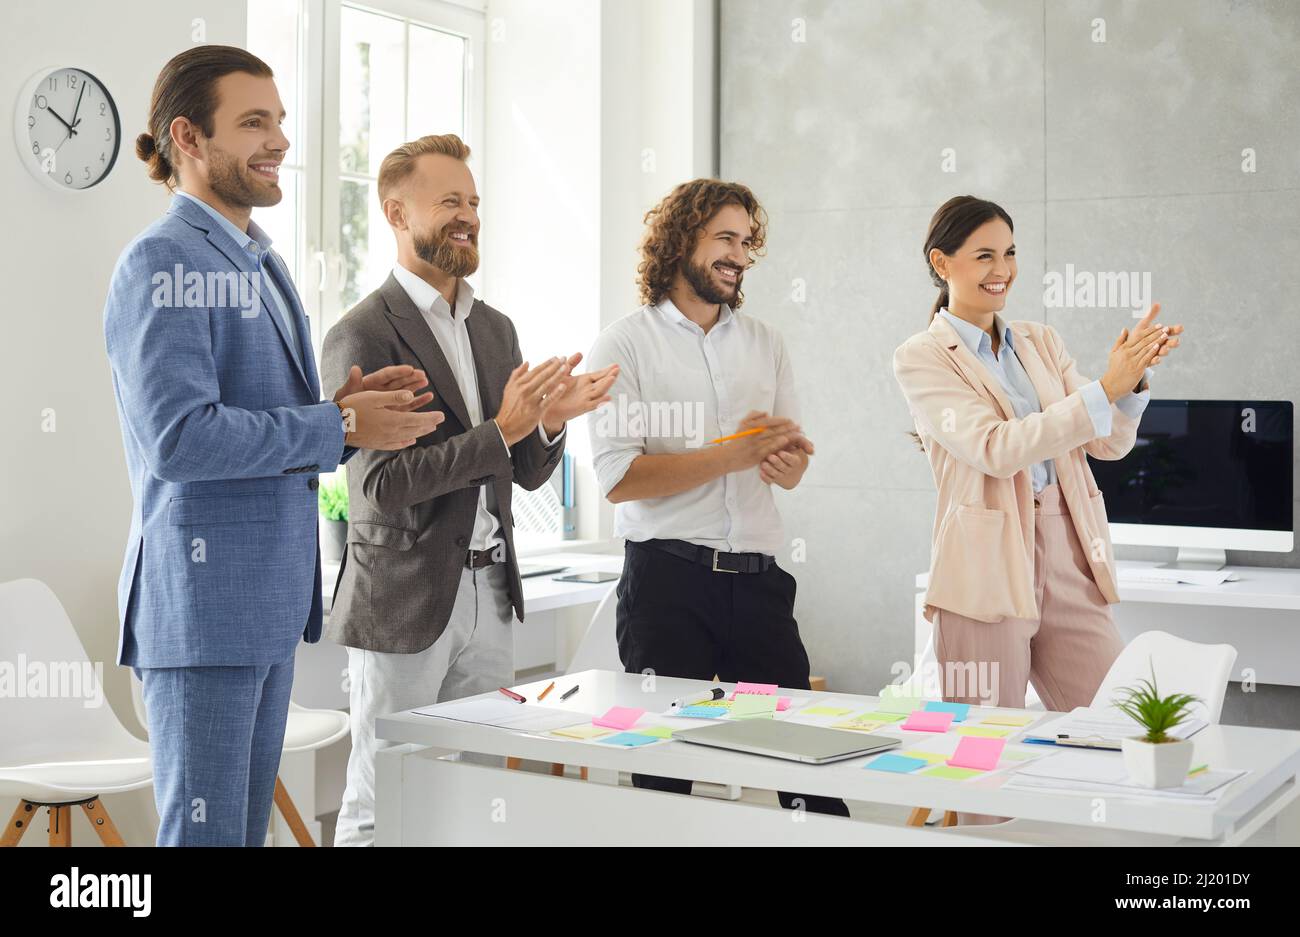 Smiling multiethnic employees applaud congratulate coworker with success Stock Photo